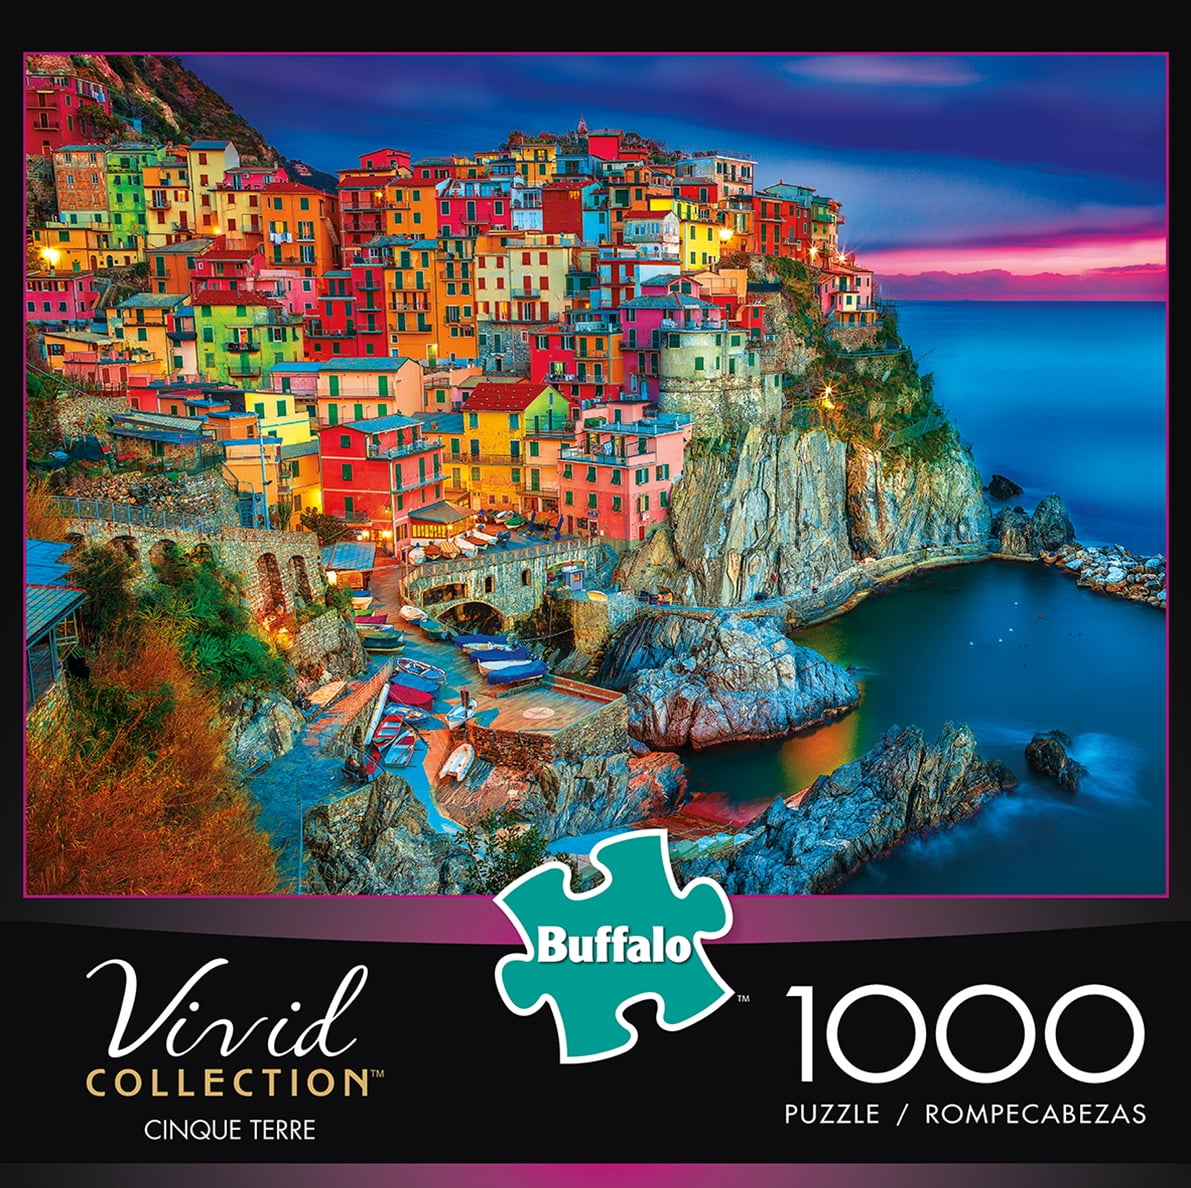 Buffalo Games Signature Collection Cinque Terre Jigsaw Puzzle 1000 Pieces for sale online 